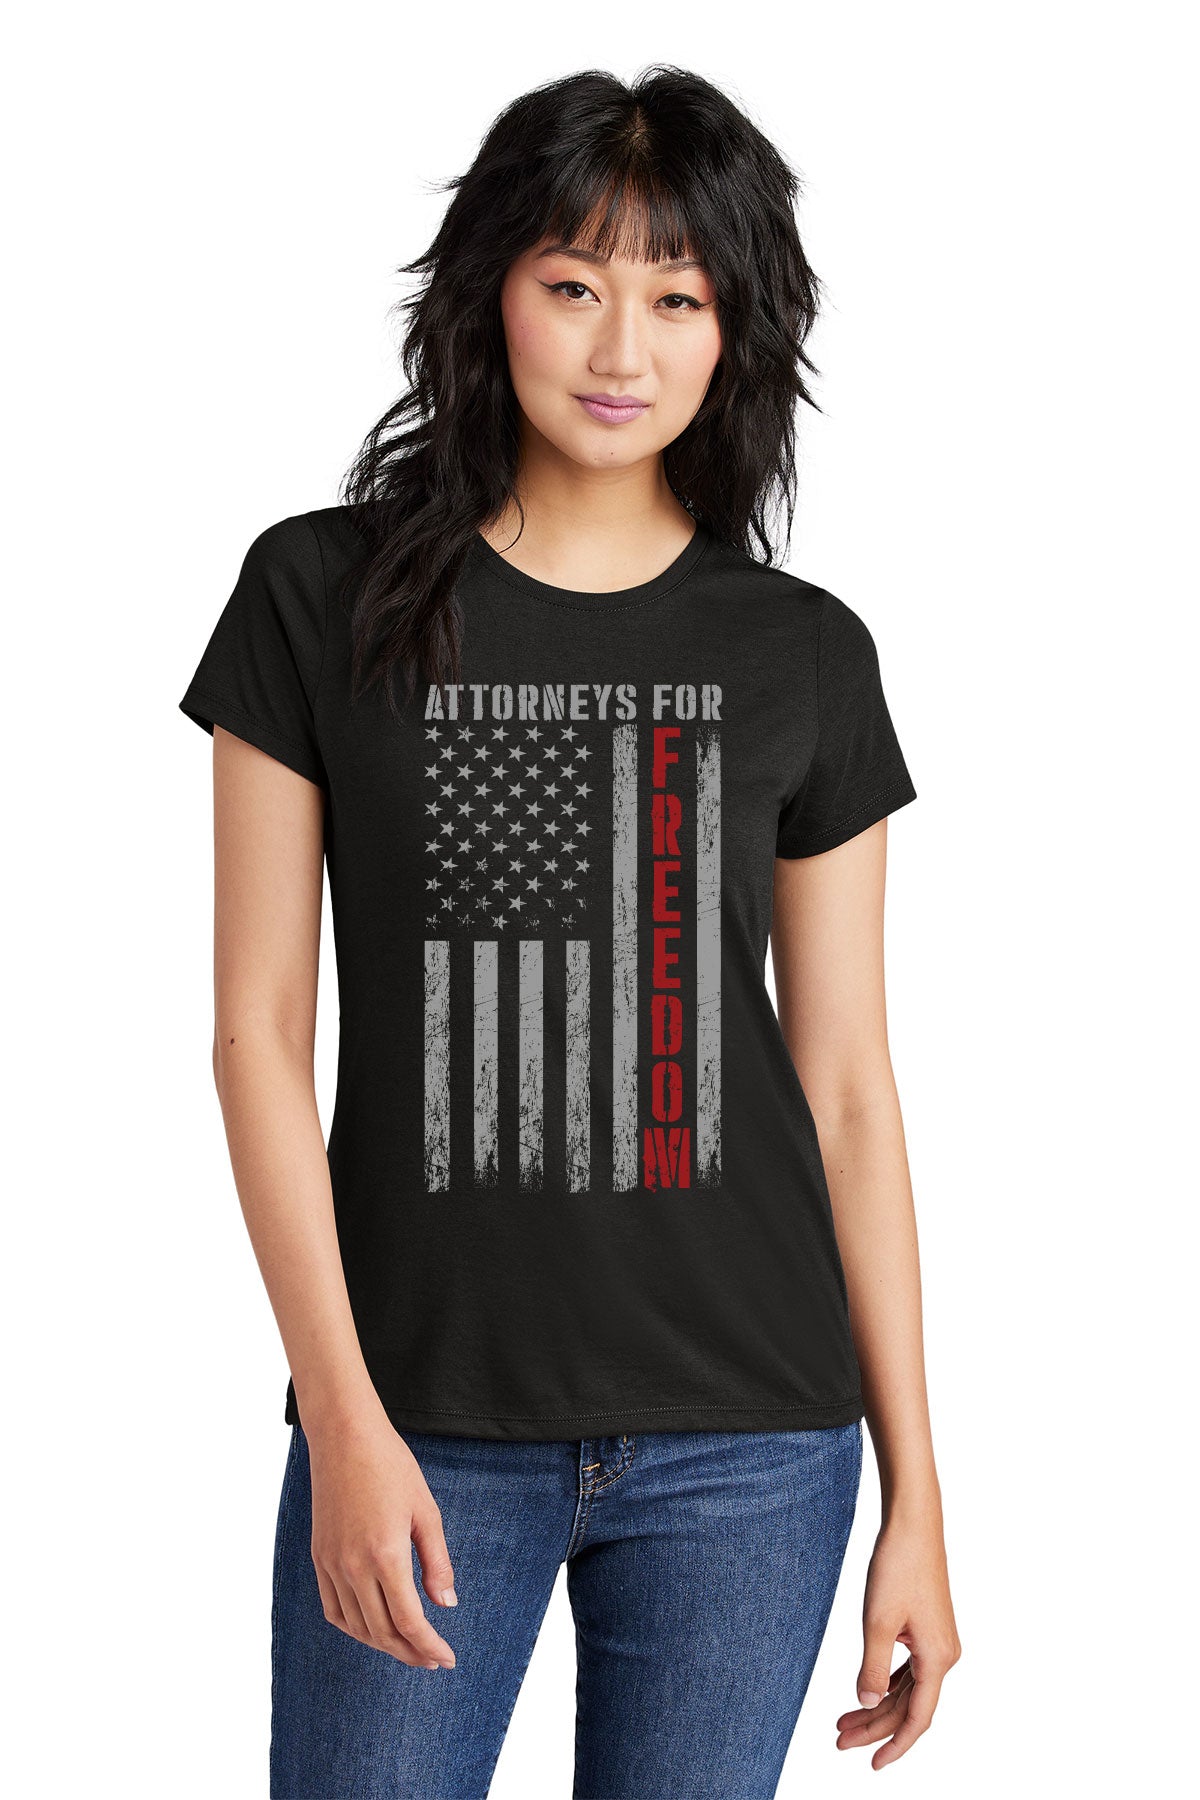 Women's Attorneys For Freedom Flag T-Shirt